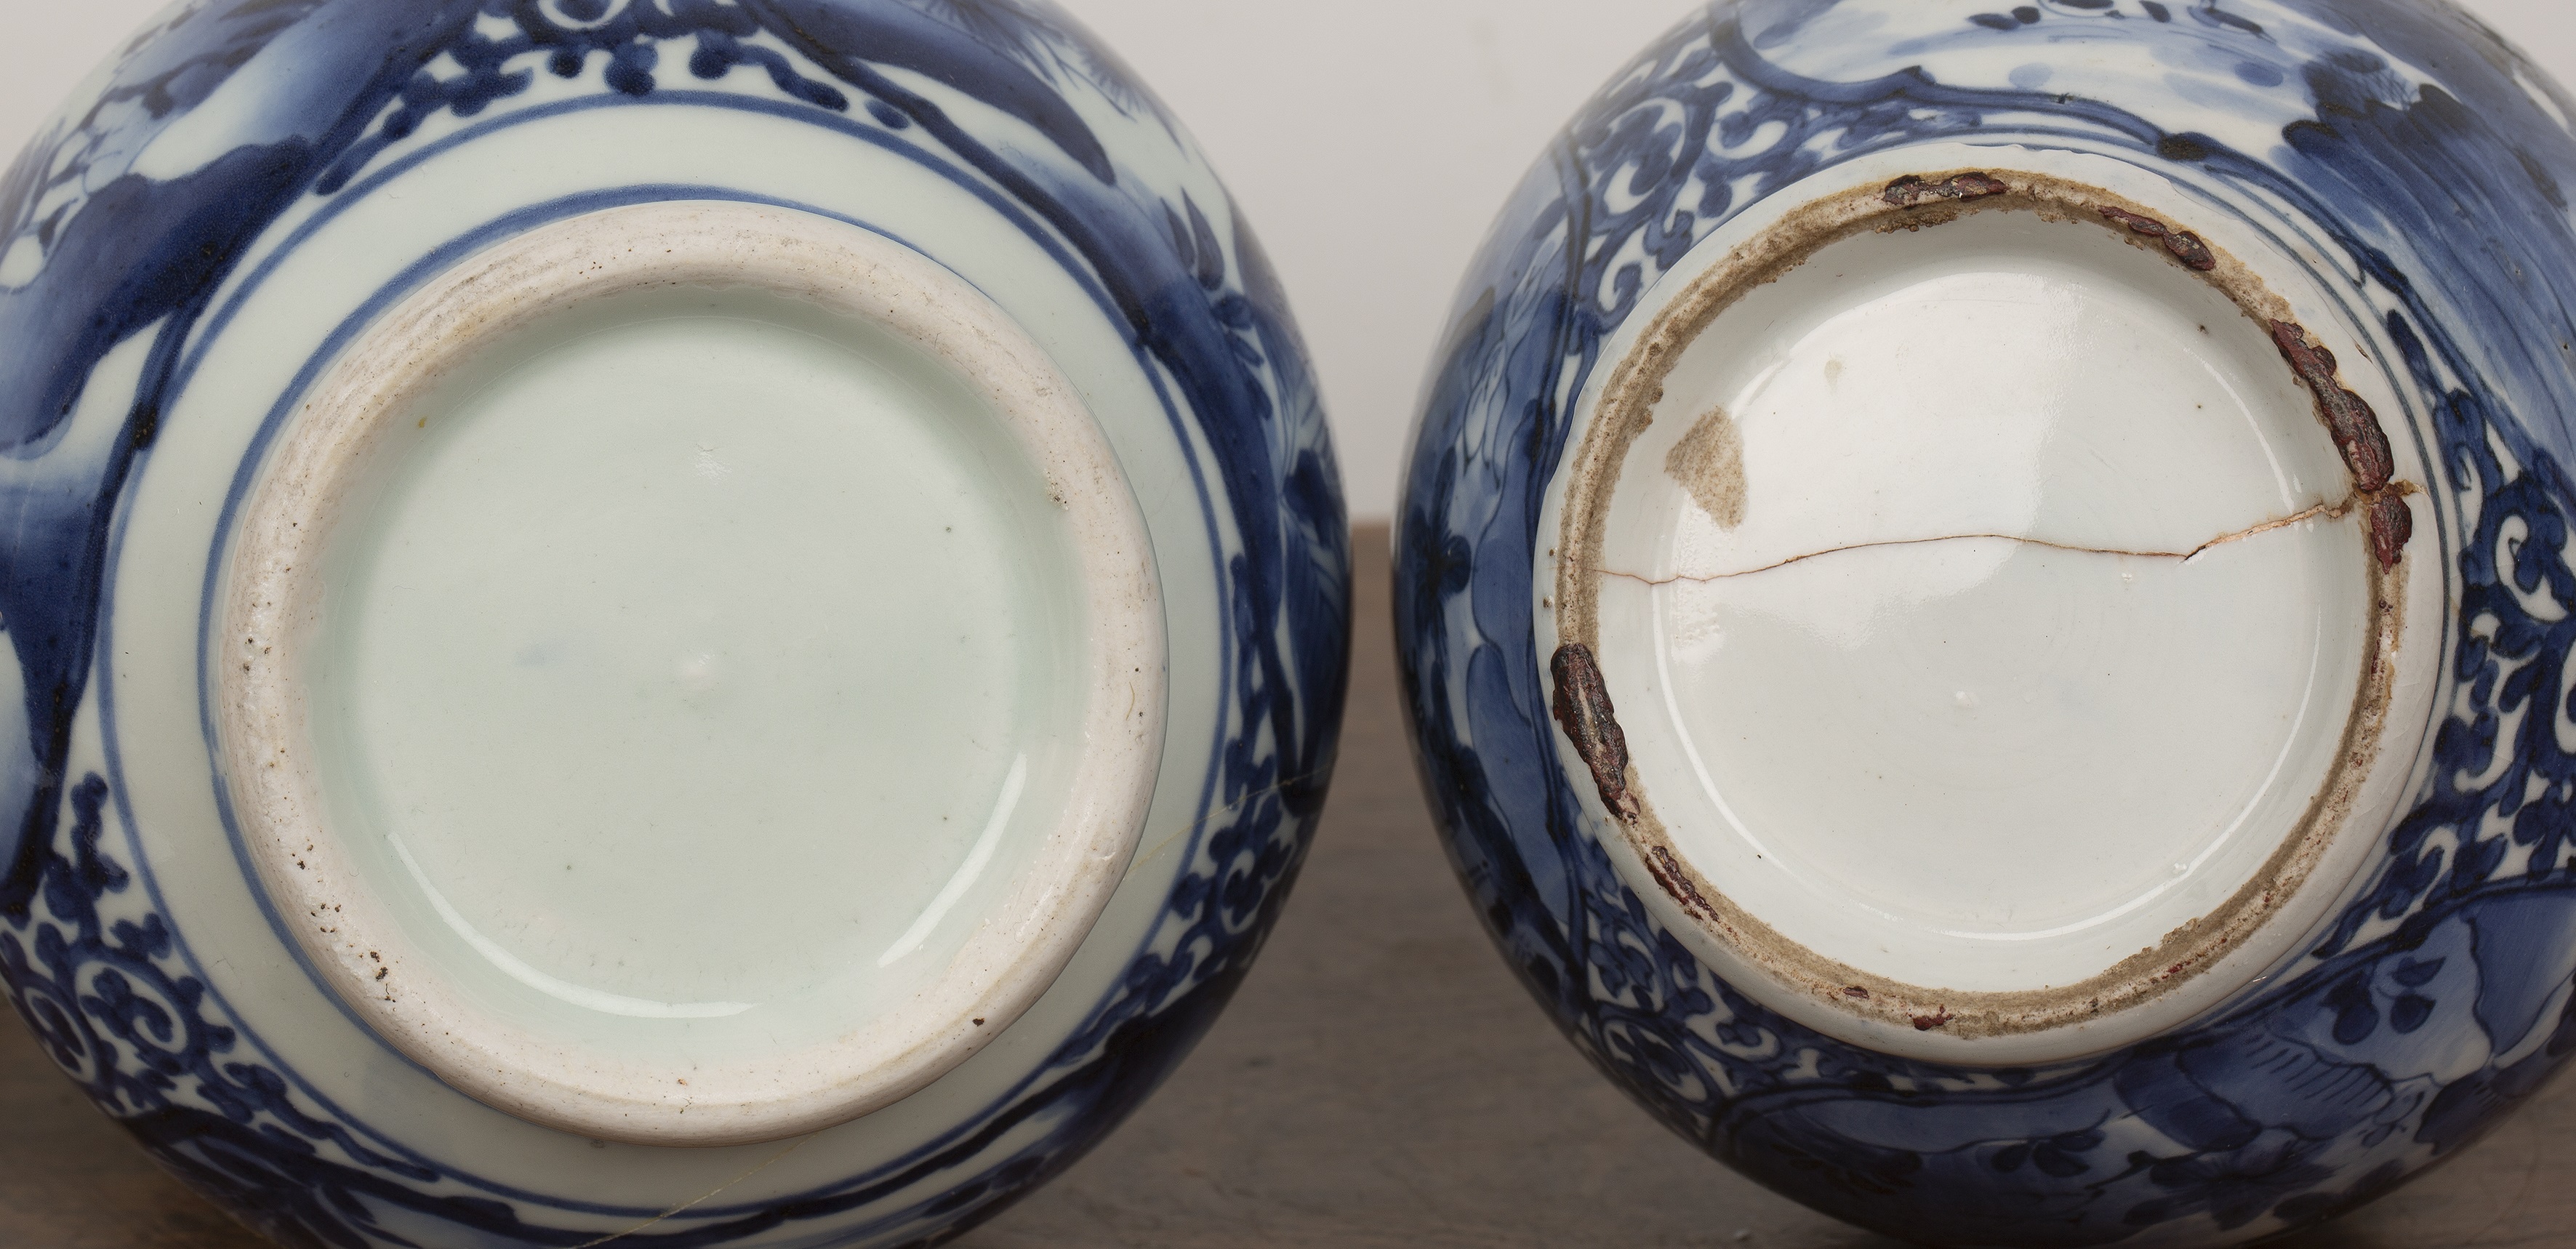 Blue and white porcelain Arita and a tankard Japanese, circa 1700 both with panels of landscape - Image 5 of 6